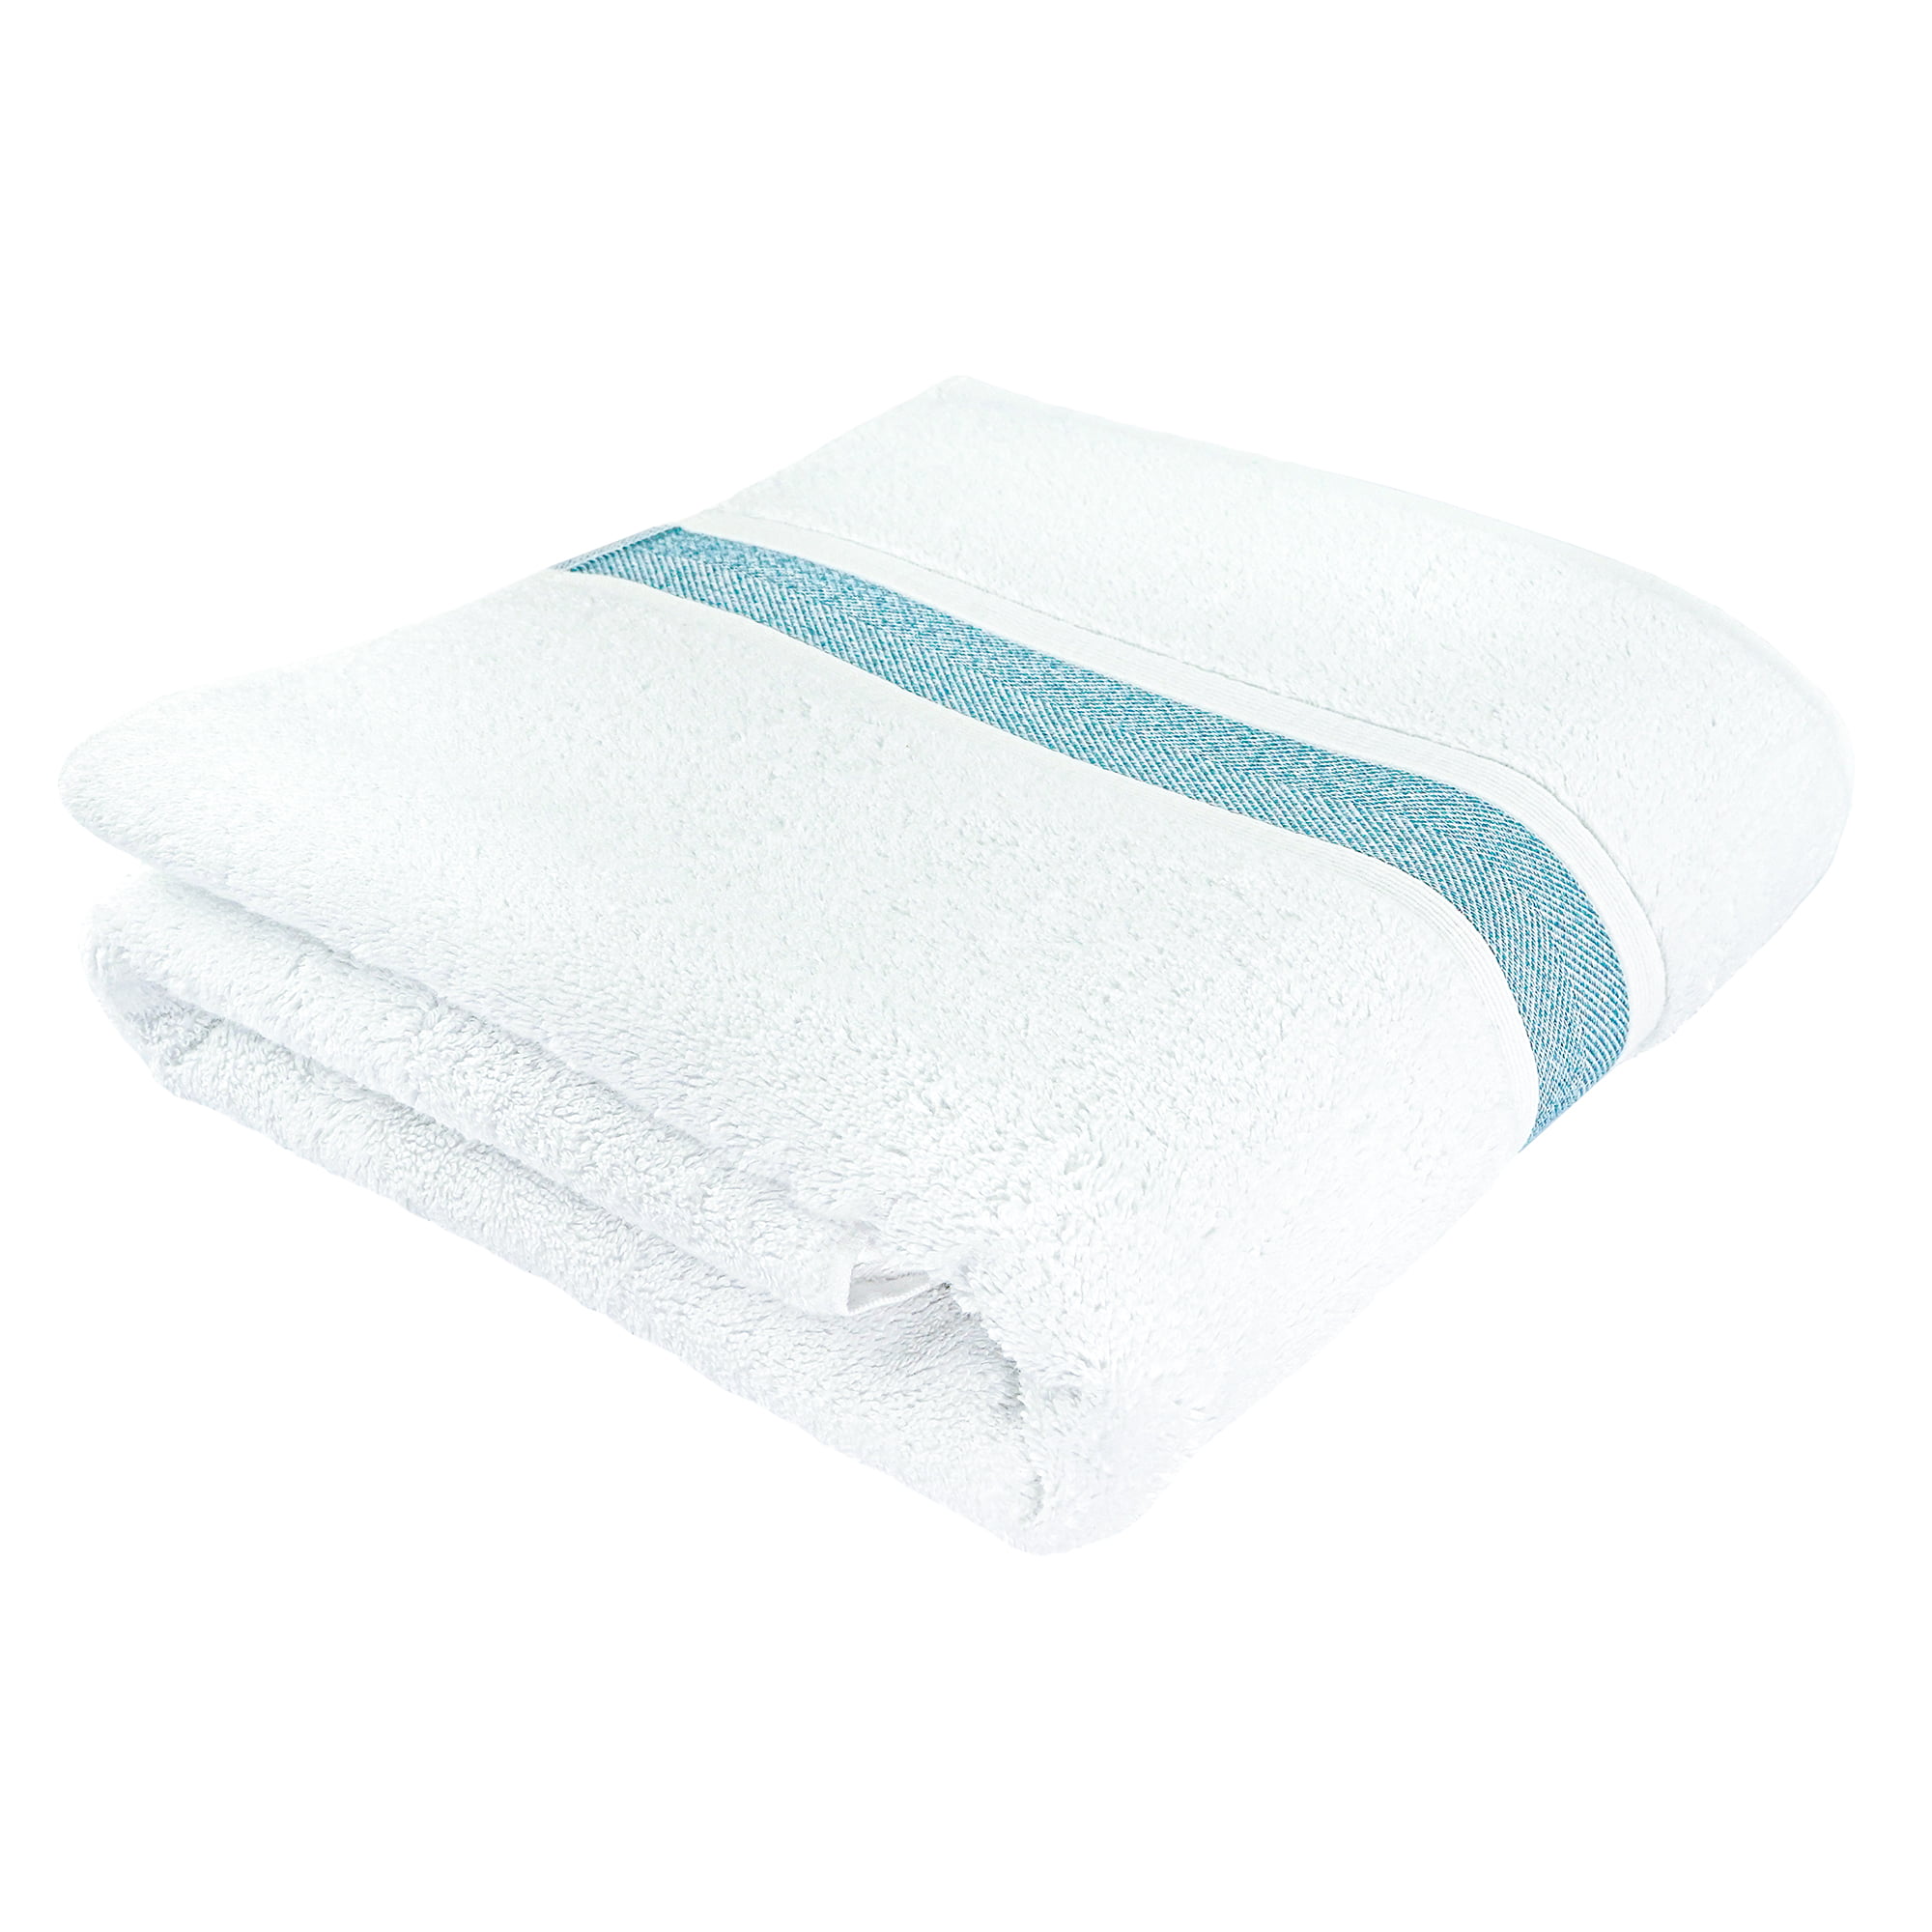 2x LARGE BATH SHEET 100% COTTON COMBED EXTRA SOFT HOTEL QUALITY TOWELS PACK OF 2 